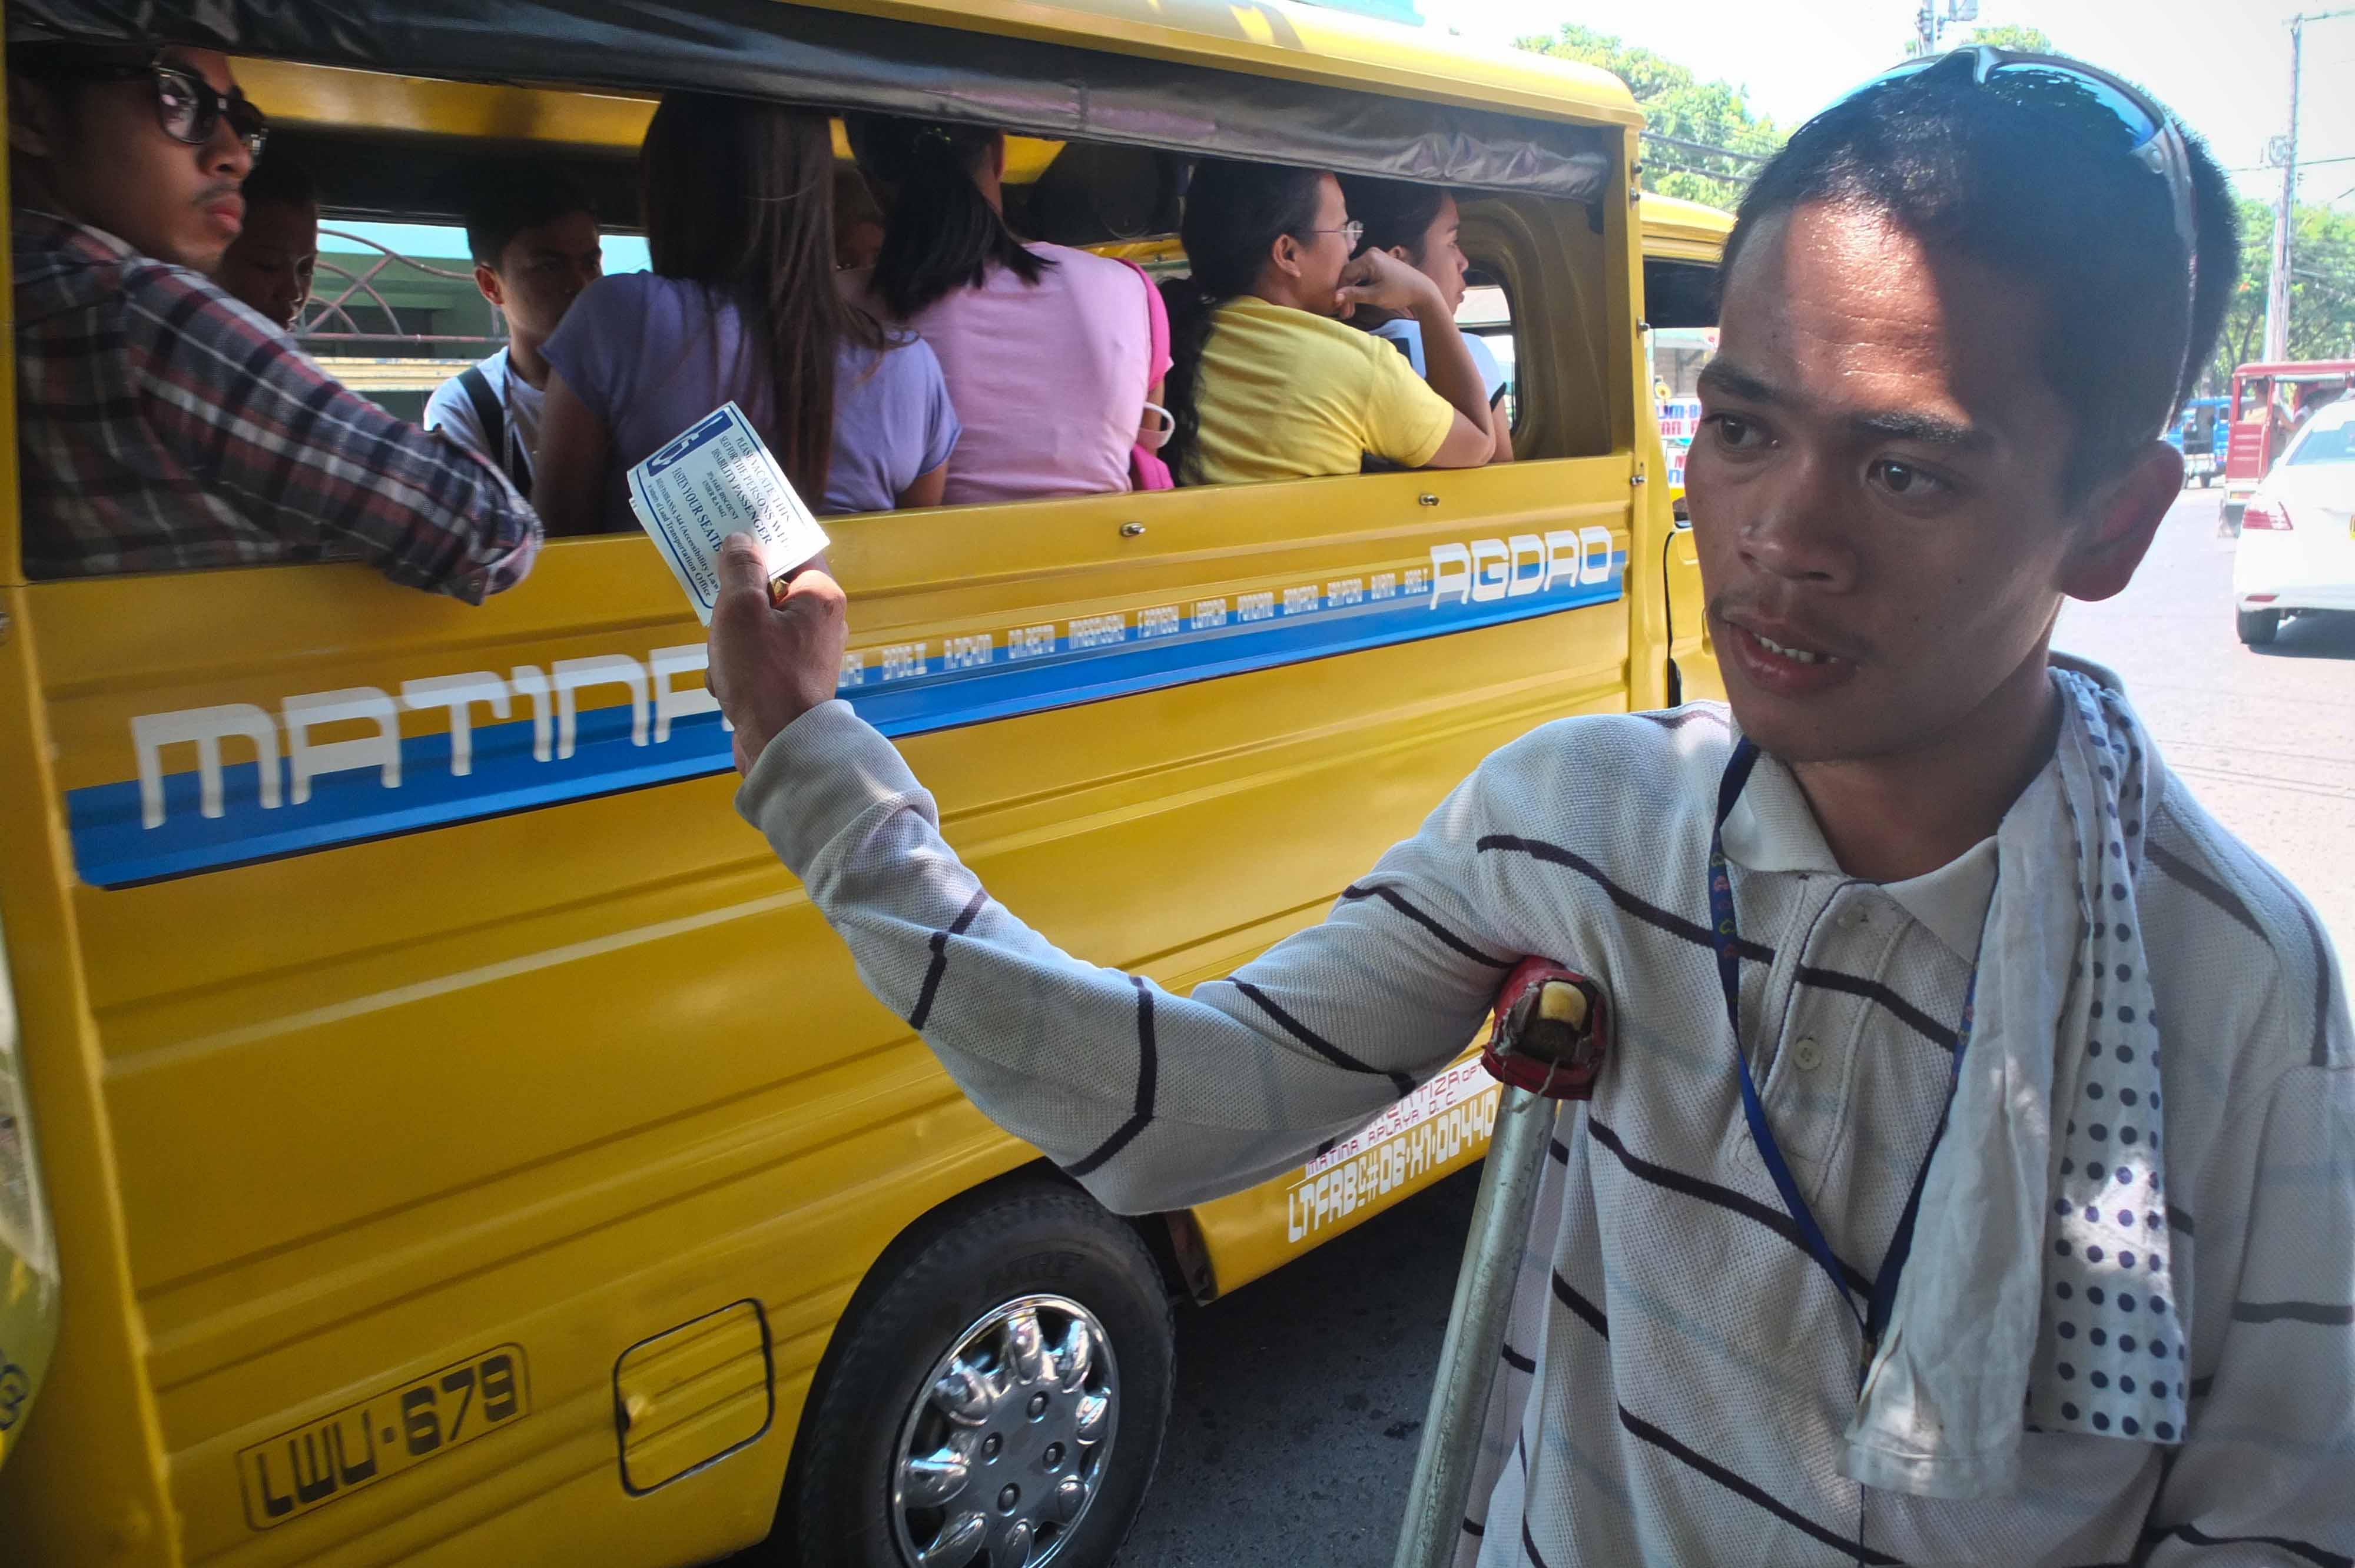 Vichard Aliño, a person with orthopedic impairment, sells stickers during the day on a mission to empower PWDs. Photo by KARLOS MANLUPIG. 